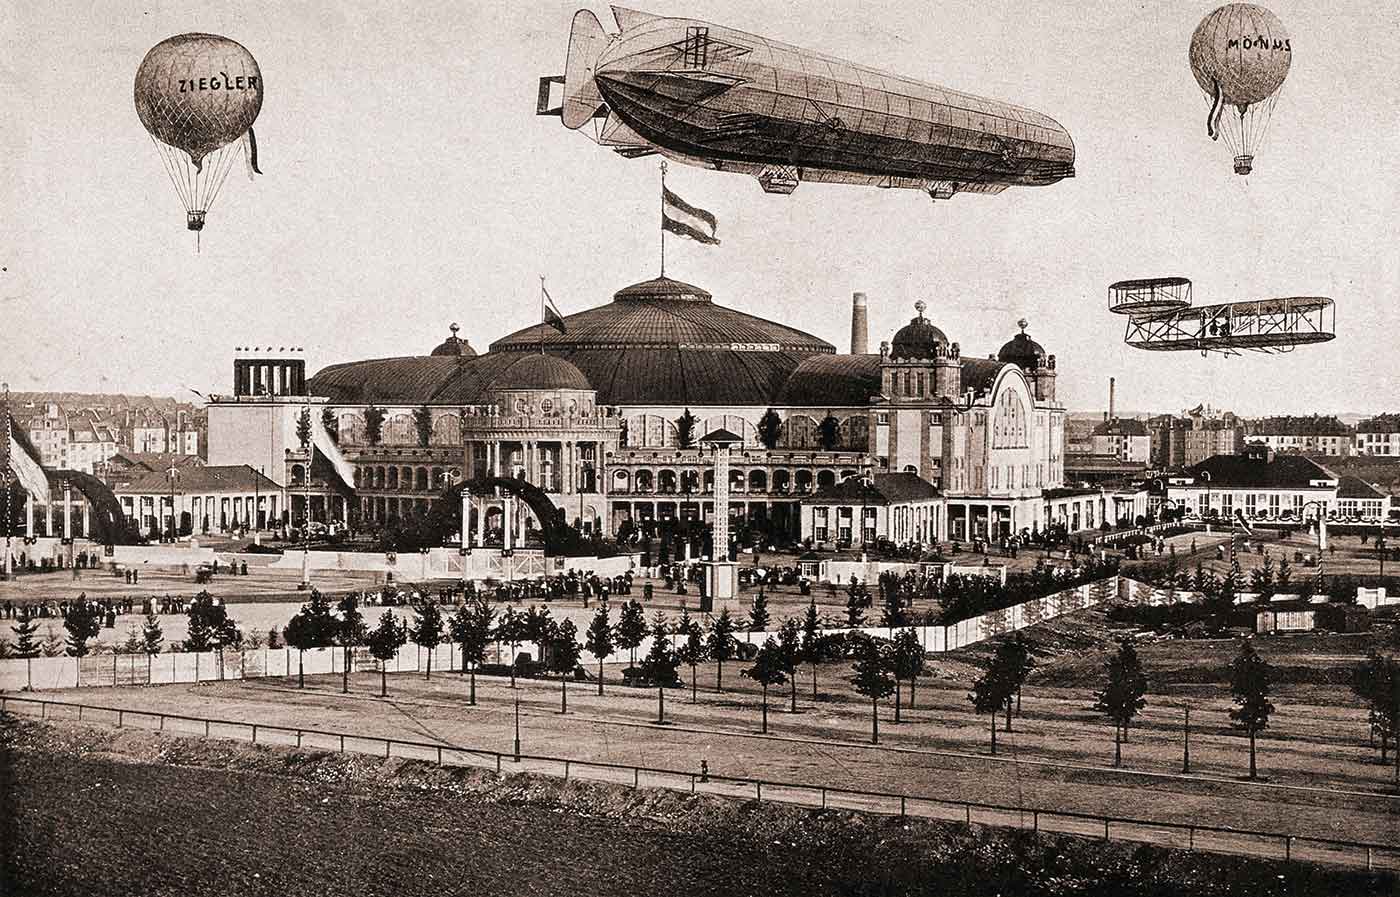 A large air-ship, aeroplane and hot-air balloons fly over a building and its grounds.